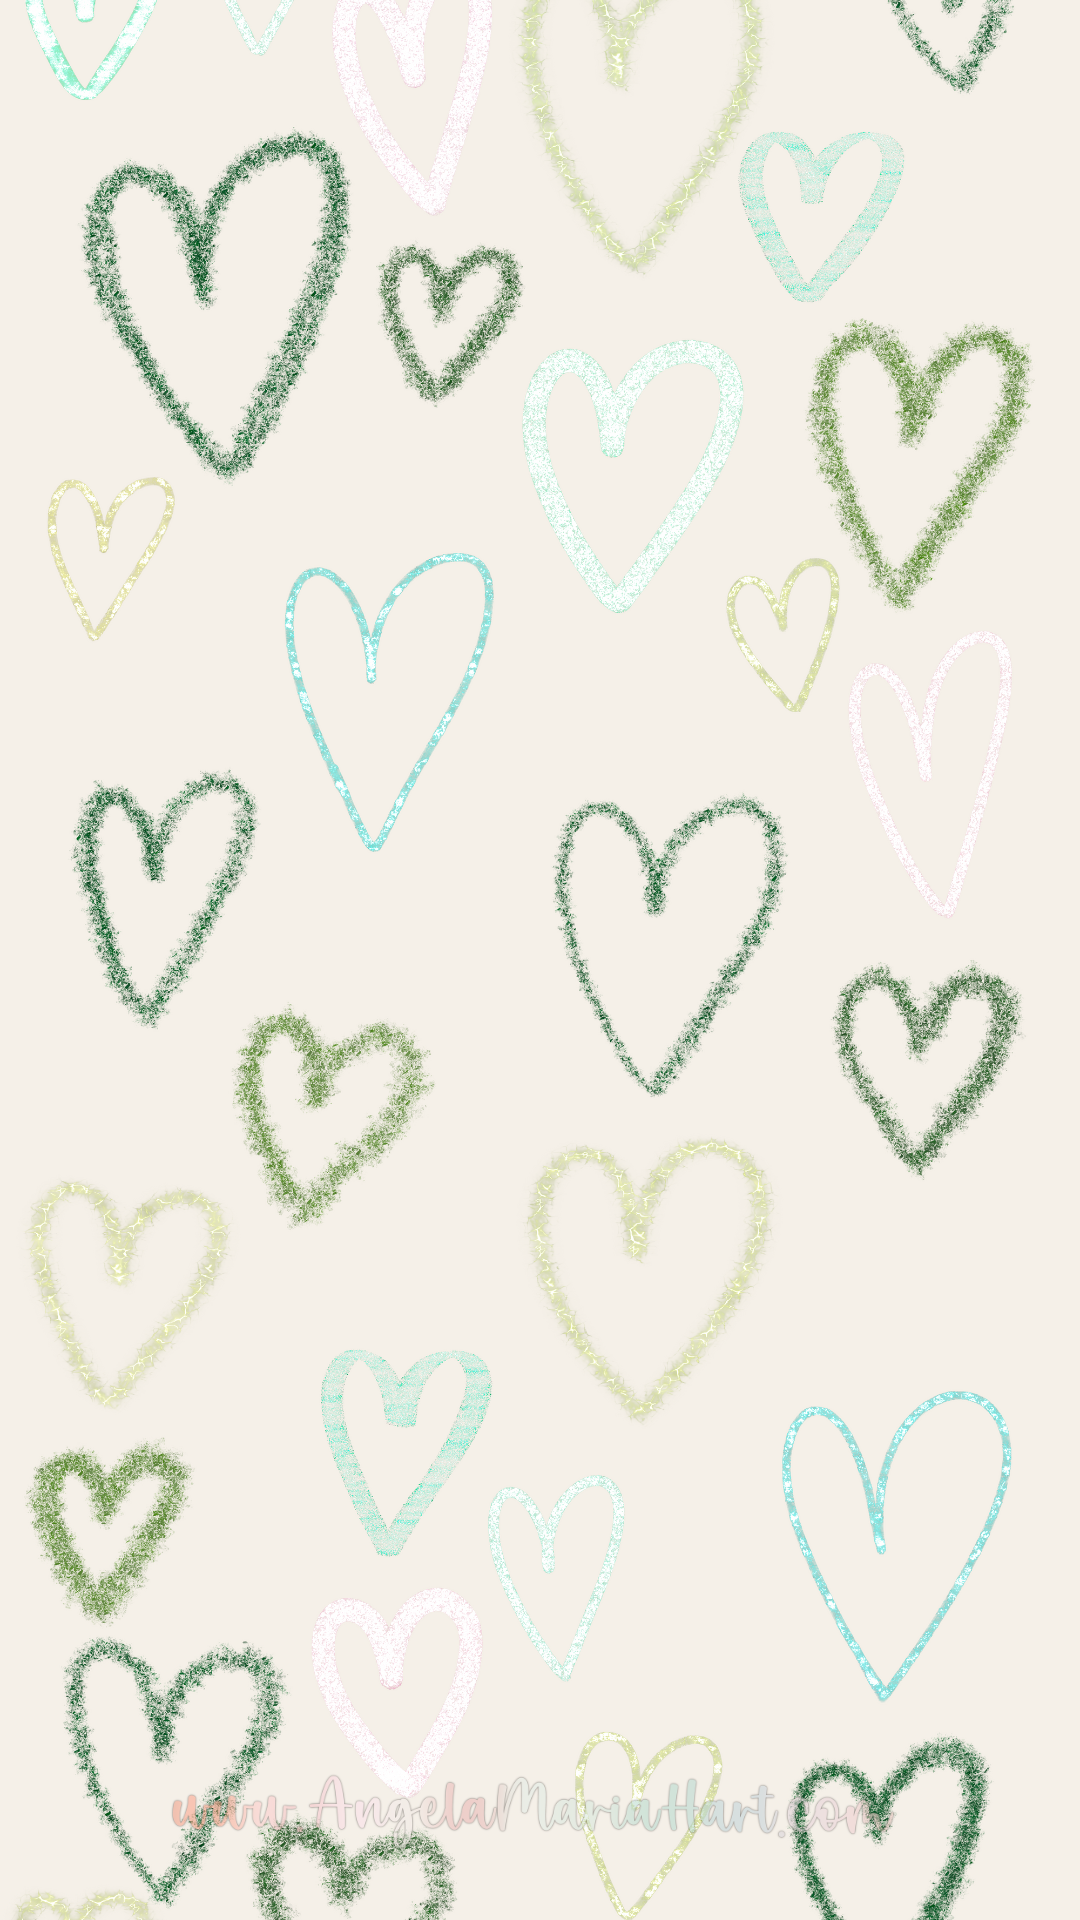 12 Days of Cozies Hearts Background Wallpaper Extra.png